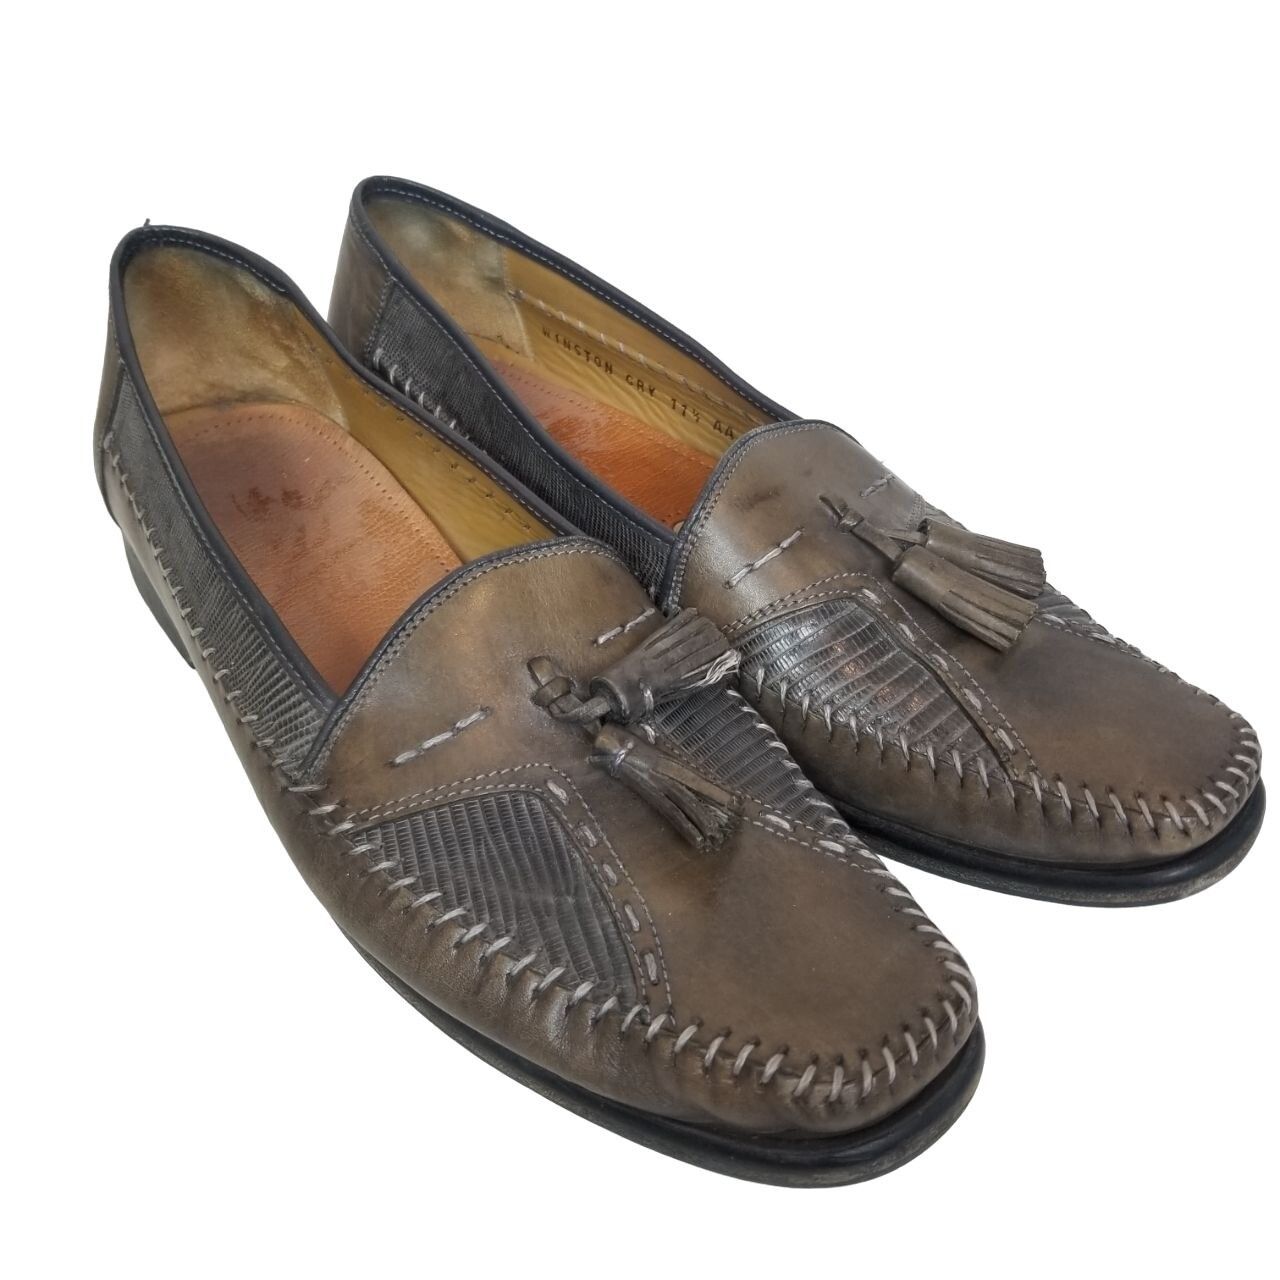 Sandro Moscoloni Sandro Moscoloni 11.5AA Leather Slip On Tassel Loafers Size US 11.5 / EU 44-45 - 2 Preview